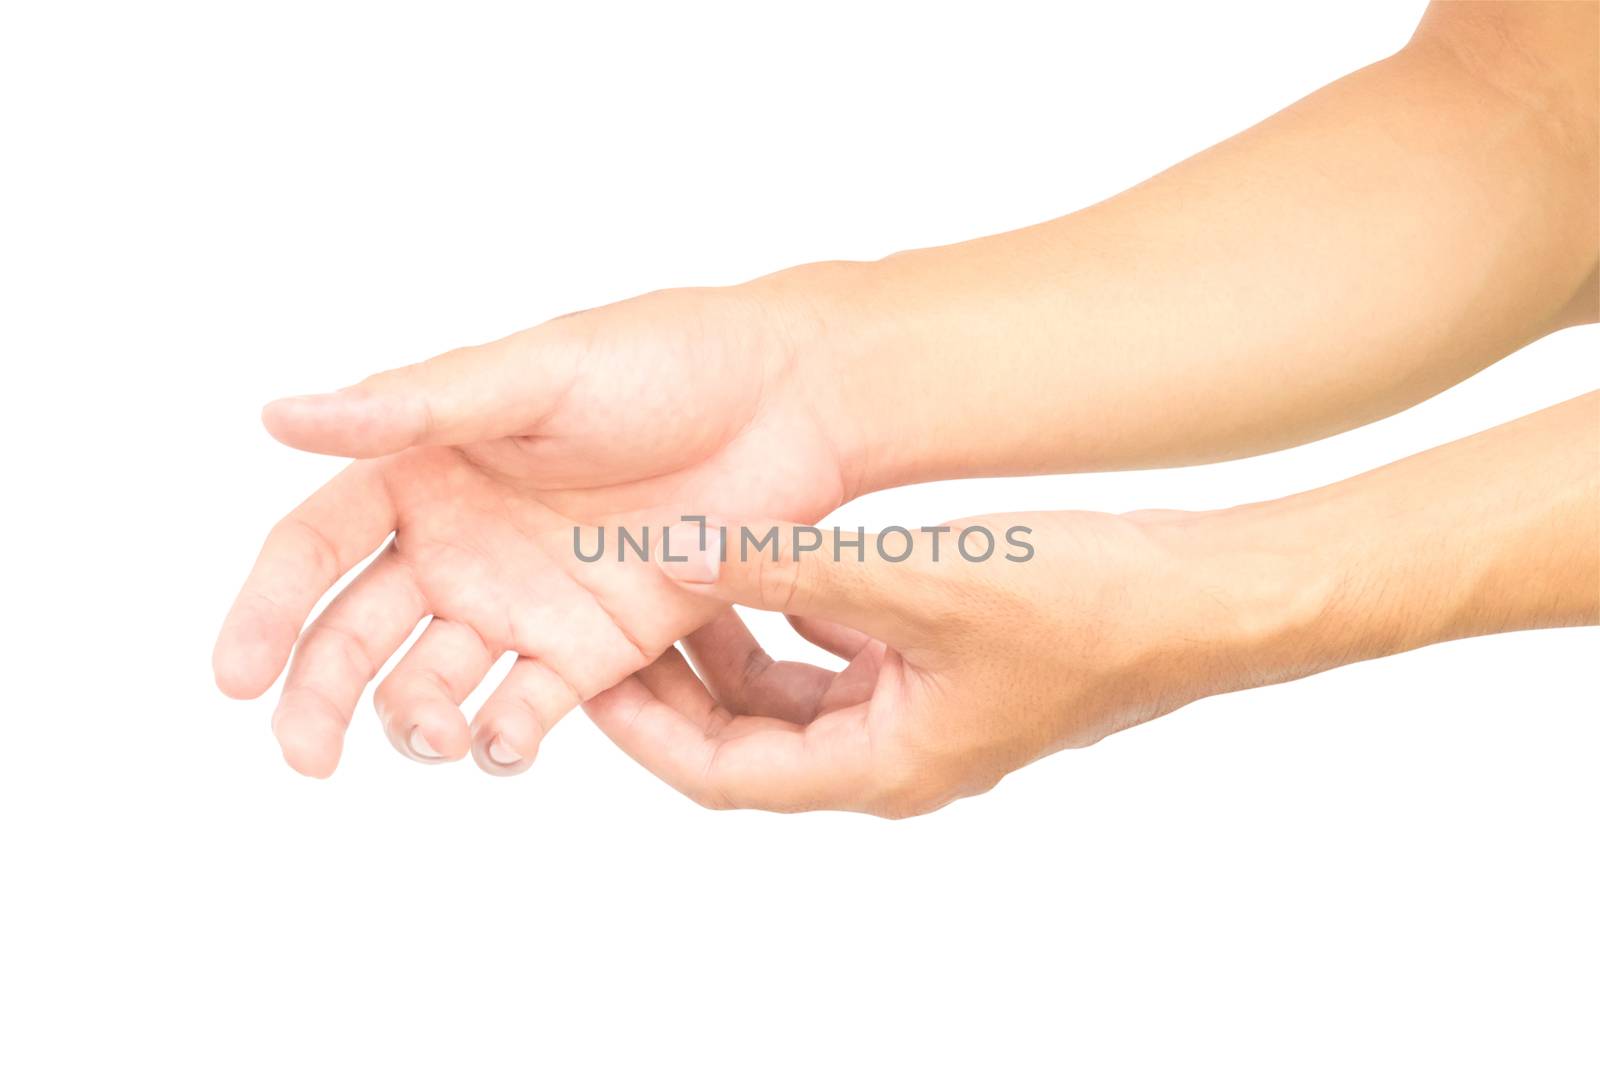 Man hand with pain isolated on white background with clipping path, health care and medical concept